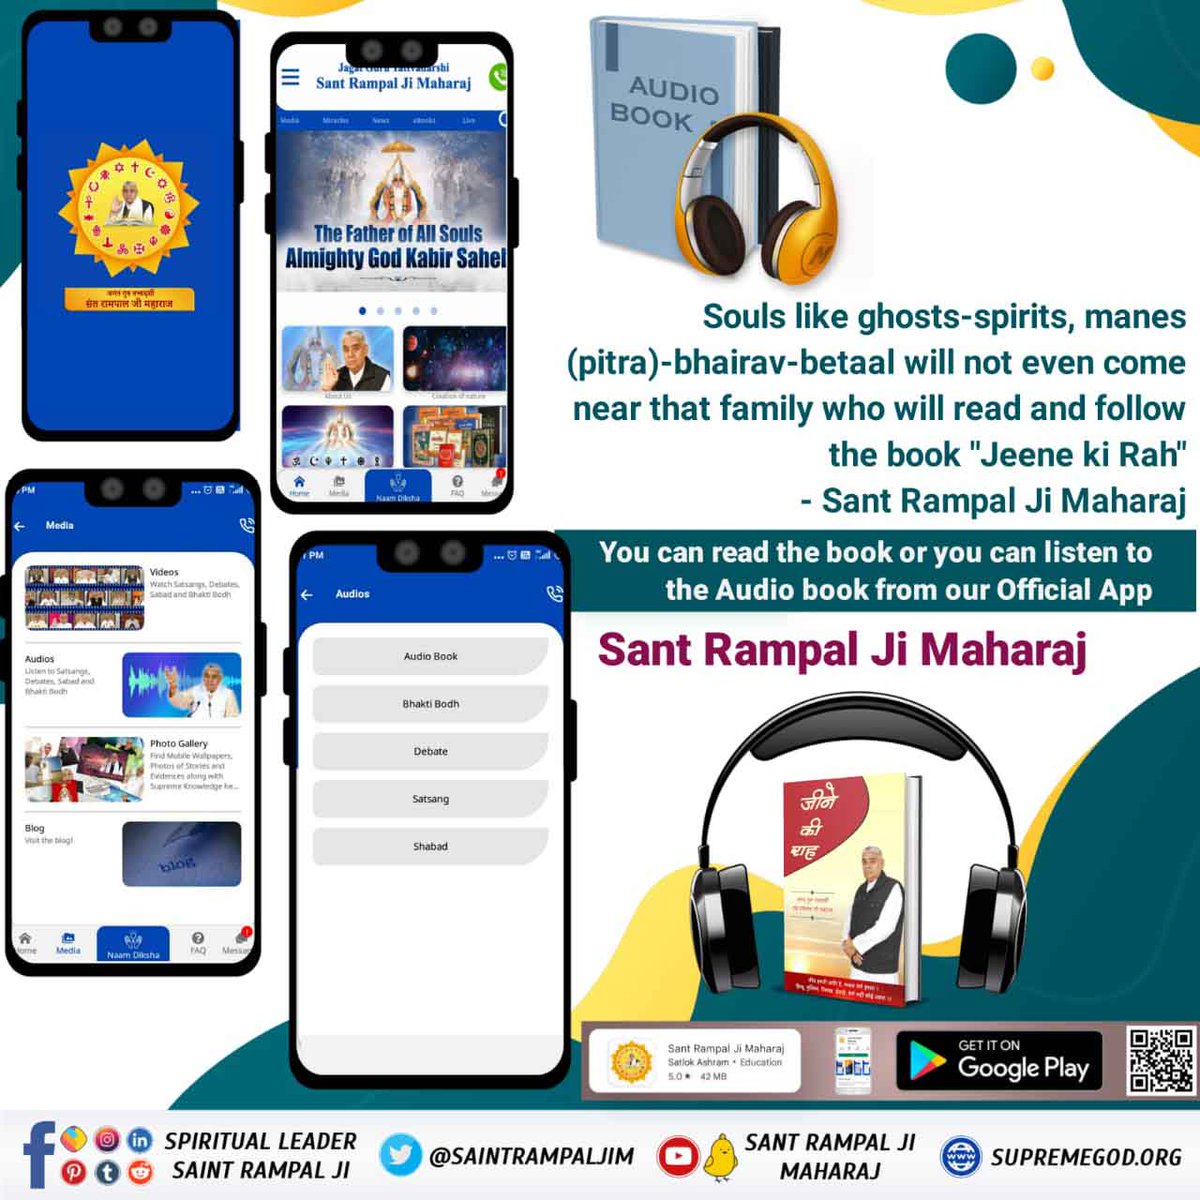 #AudioBook_JeeneKiRah Souls like ghosts-spirits, manes (pitra)-bhairav-betaal will not even come near that family who will read and follow the book 'Jeene Ki Raah' Download Audio Book from our Official App 'SANT RAMPAL JI MAHARAJ' to listen